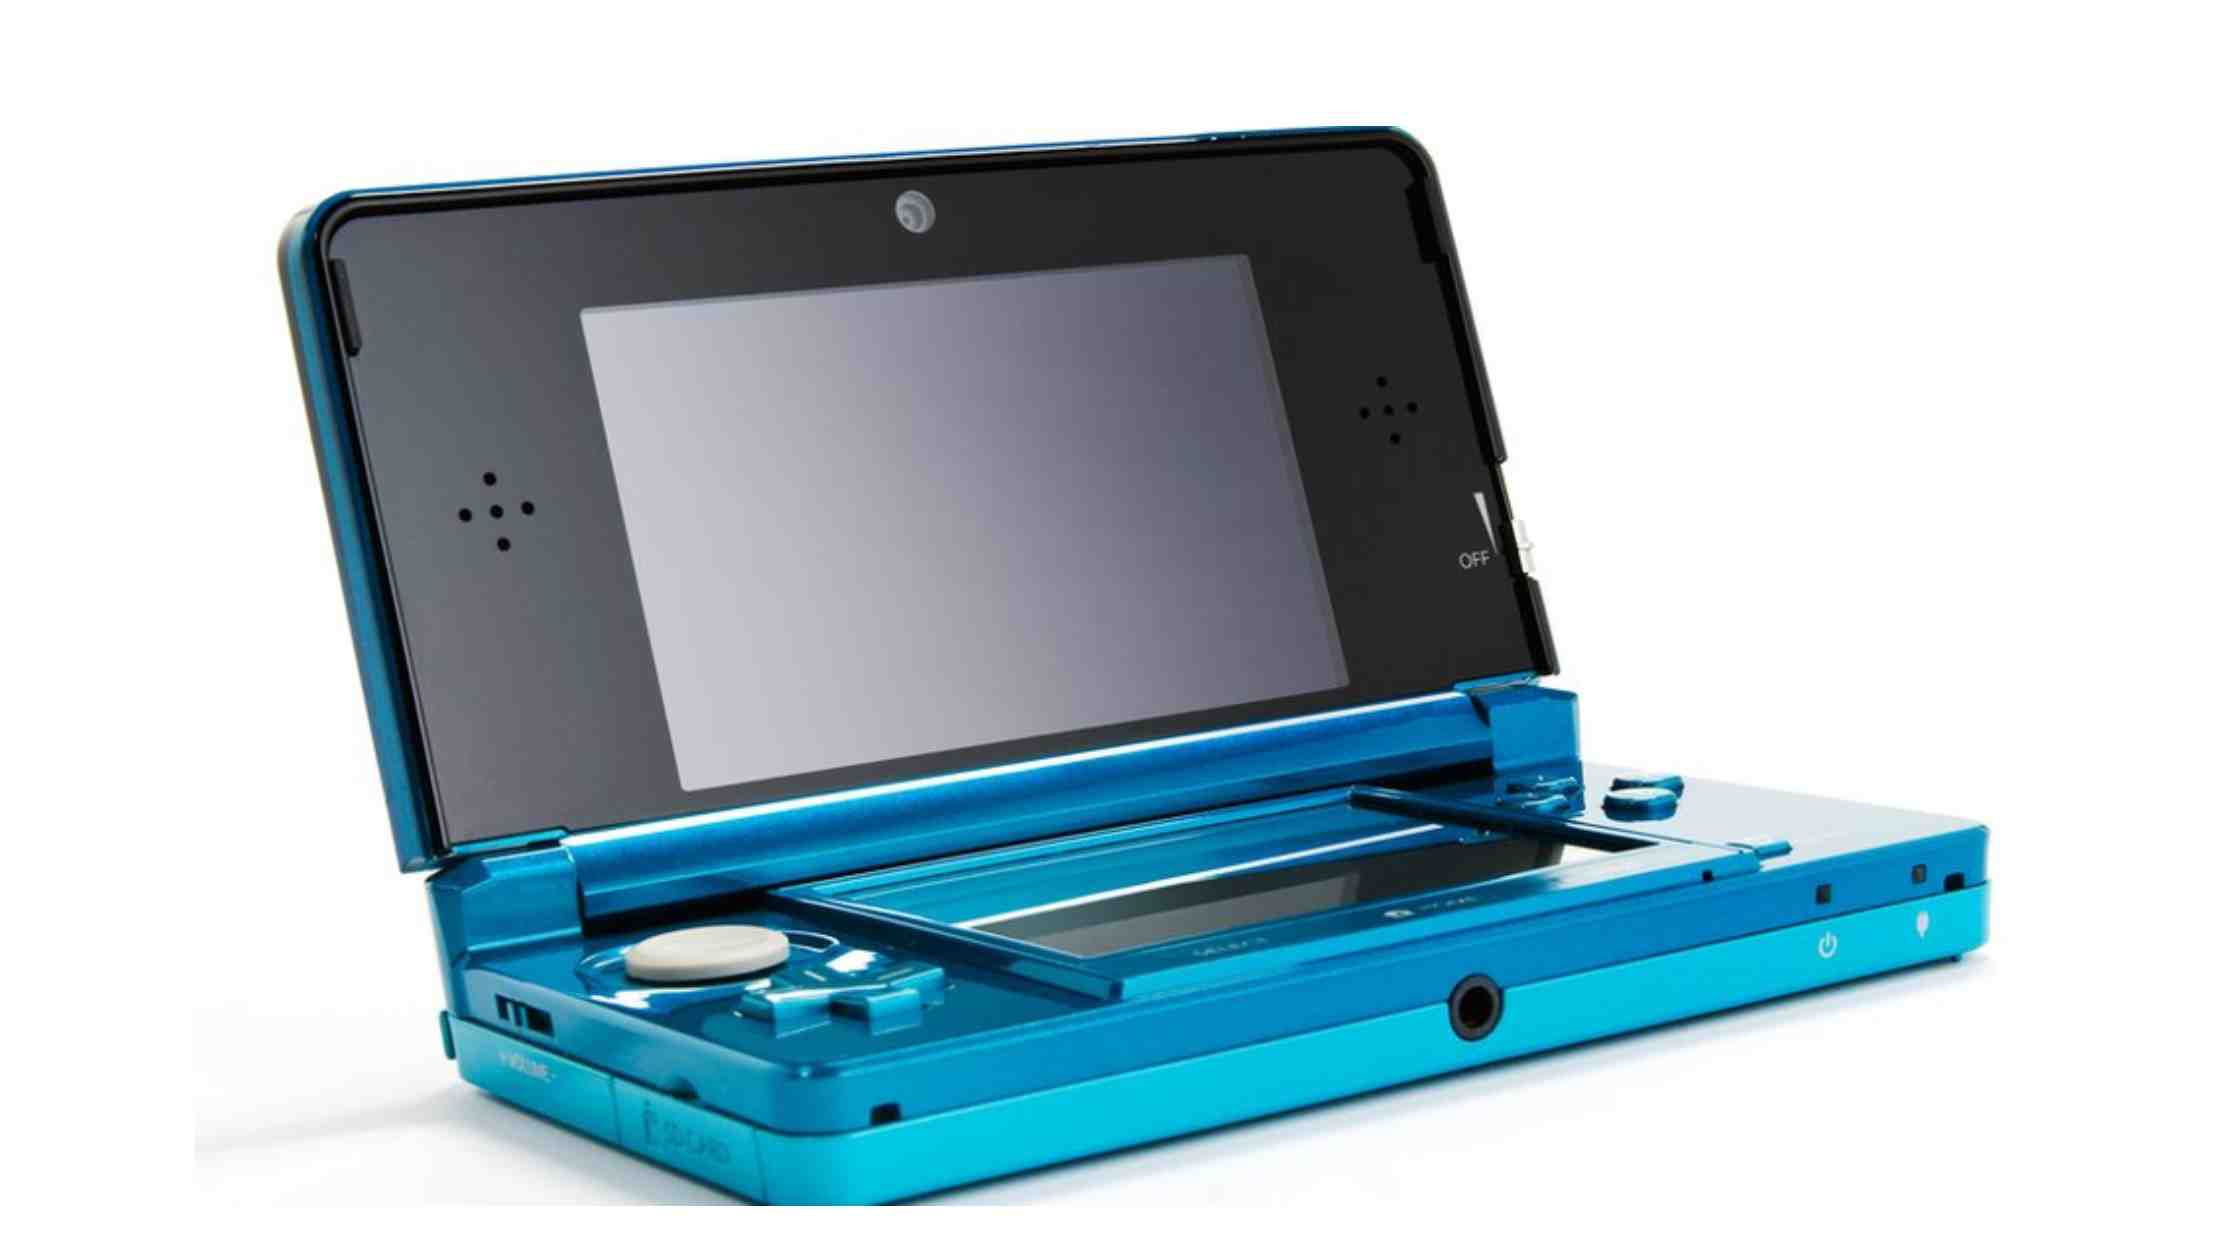 Nintendo 3DS discontinued